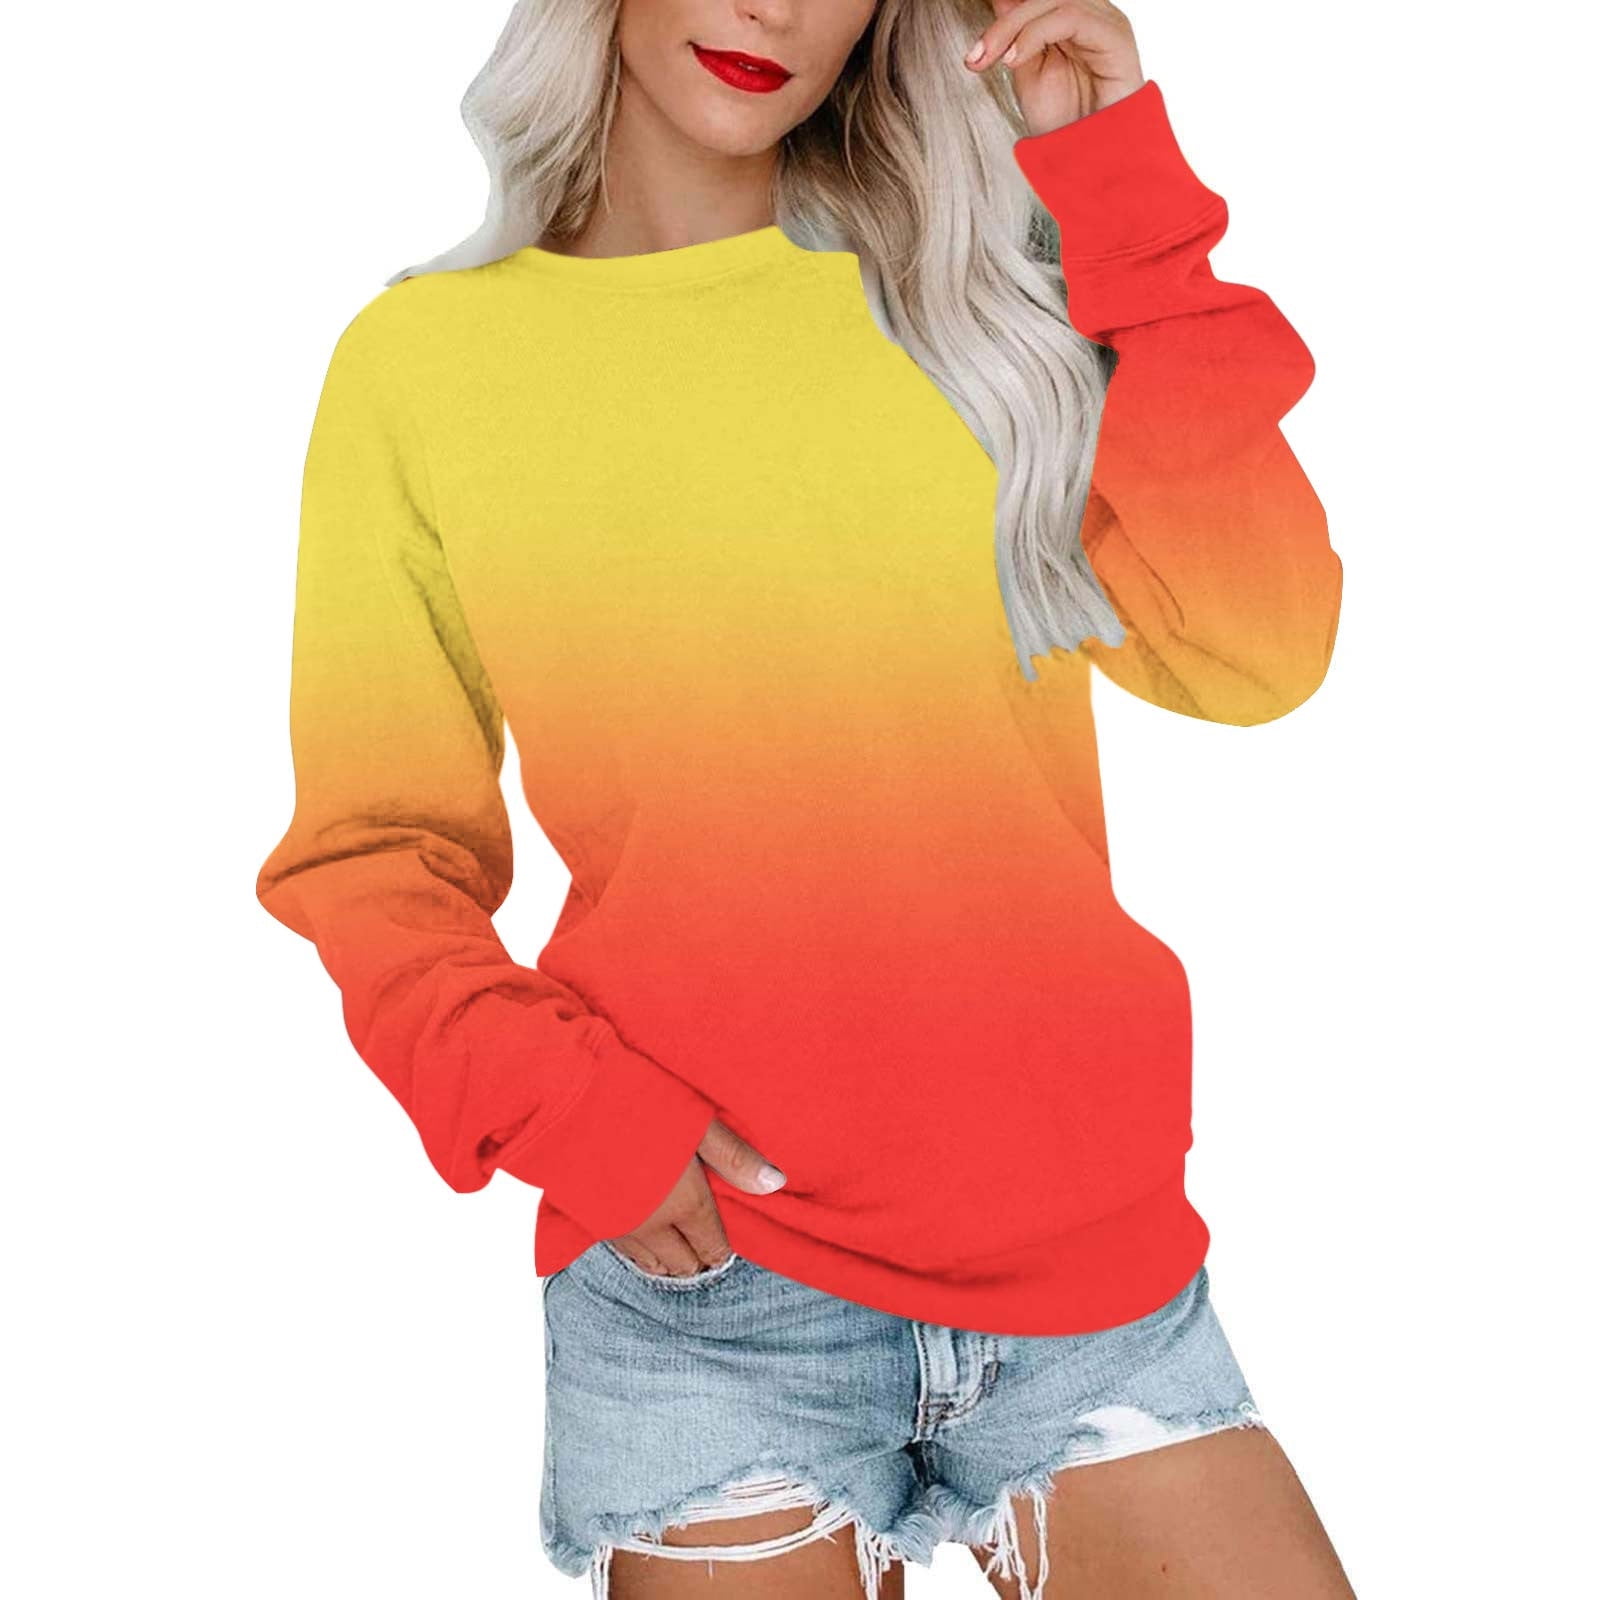 overstock items clearance all prime,Womens Oversized Sweatshirts Pullover  Casual Crewneck Long Sleeve Tops Comfy,Womens Casual Tops Loose Fit